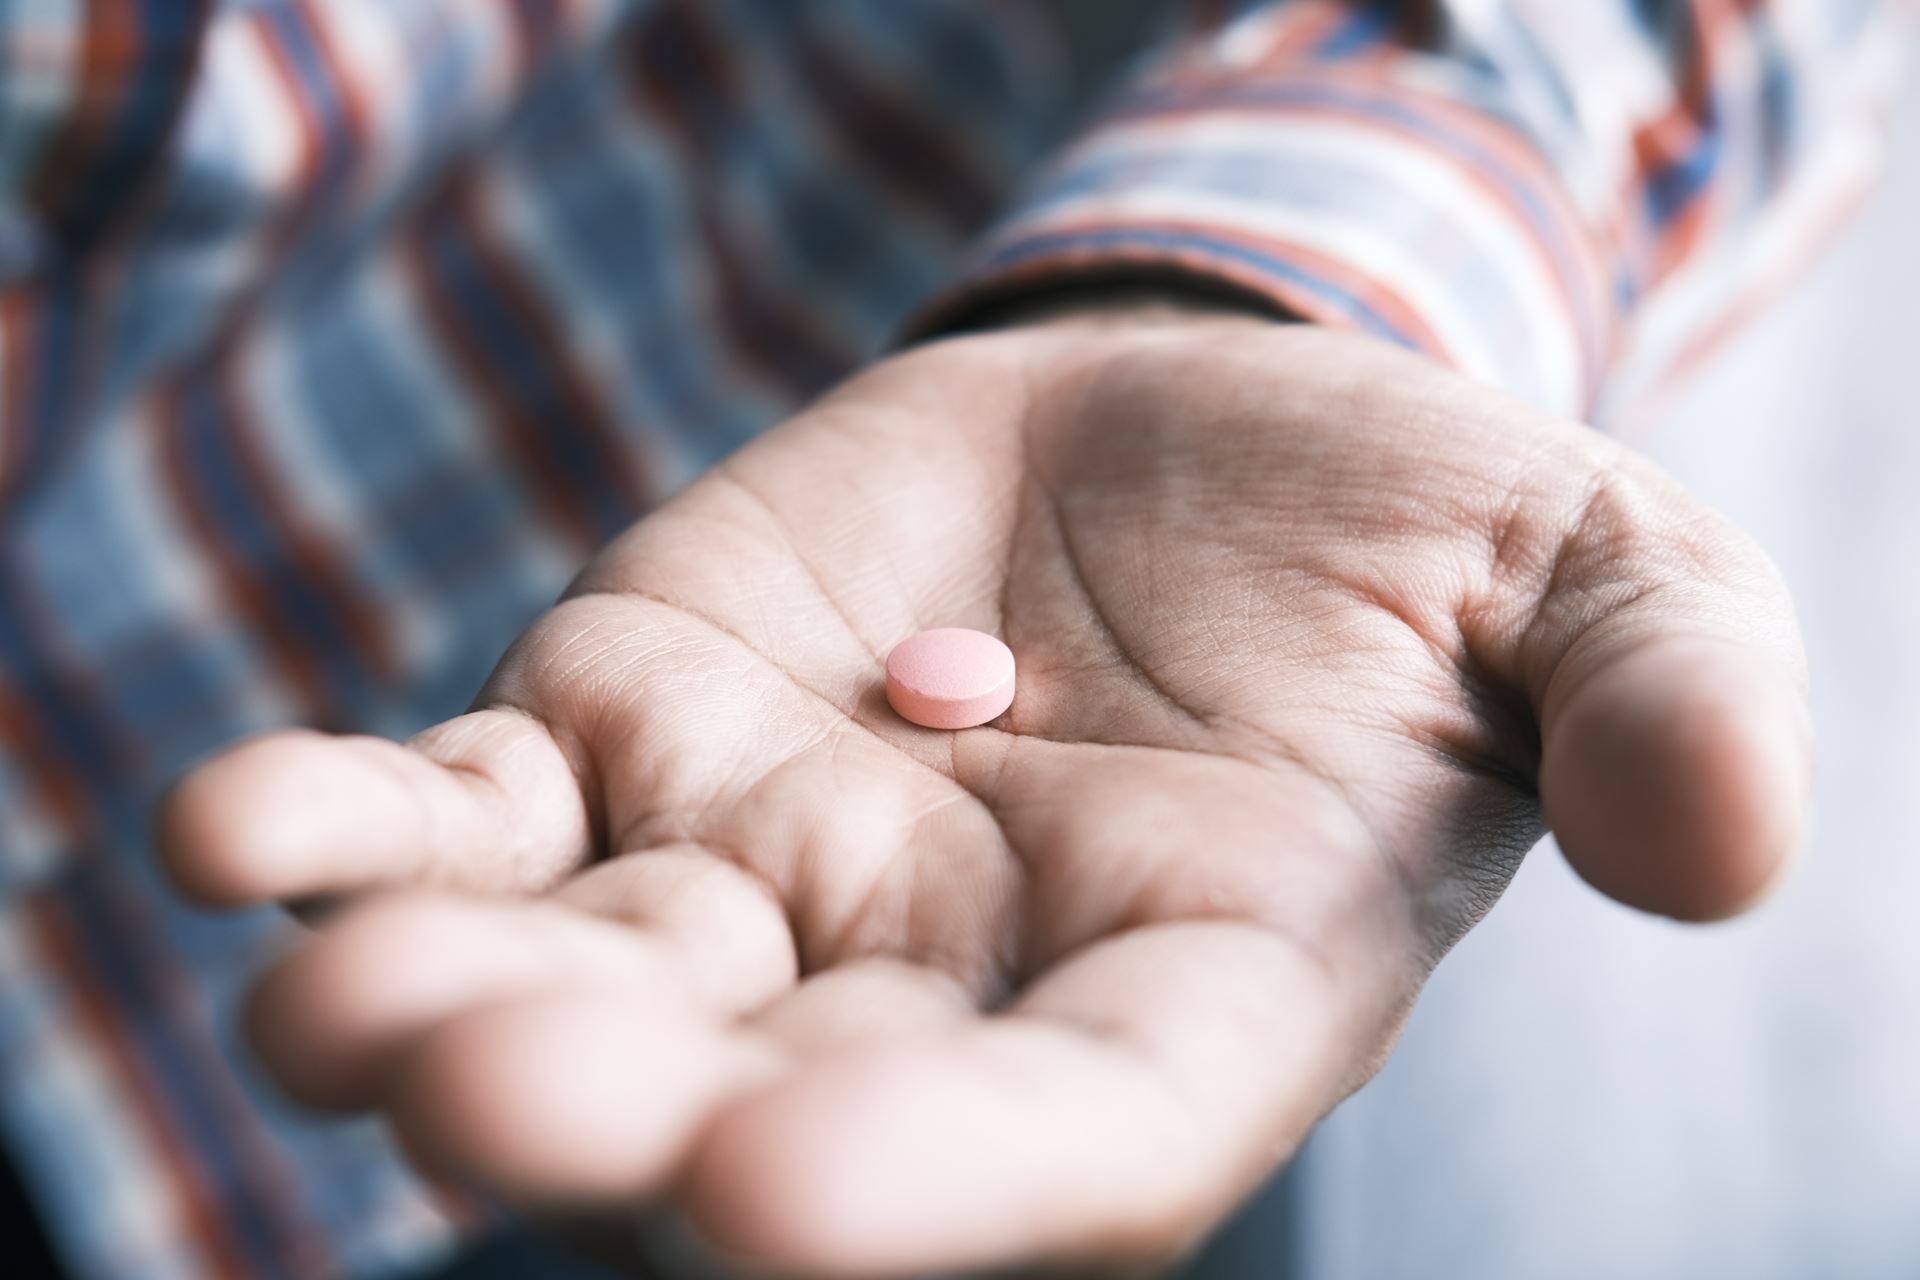 medication in a persons hand